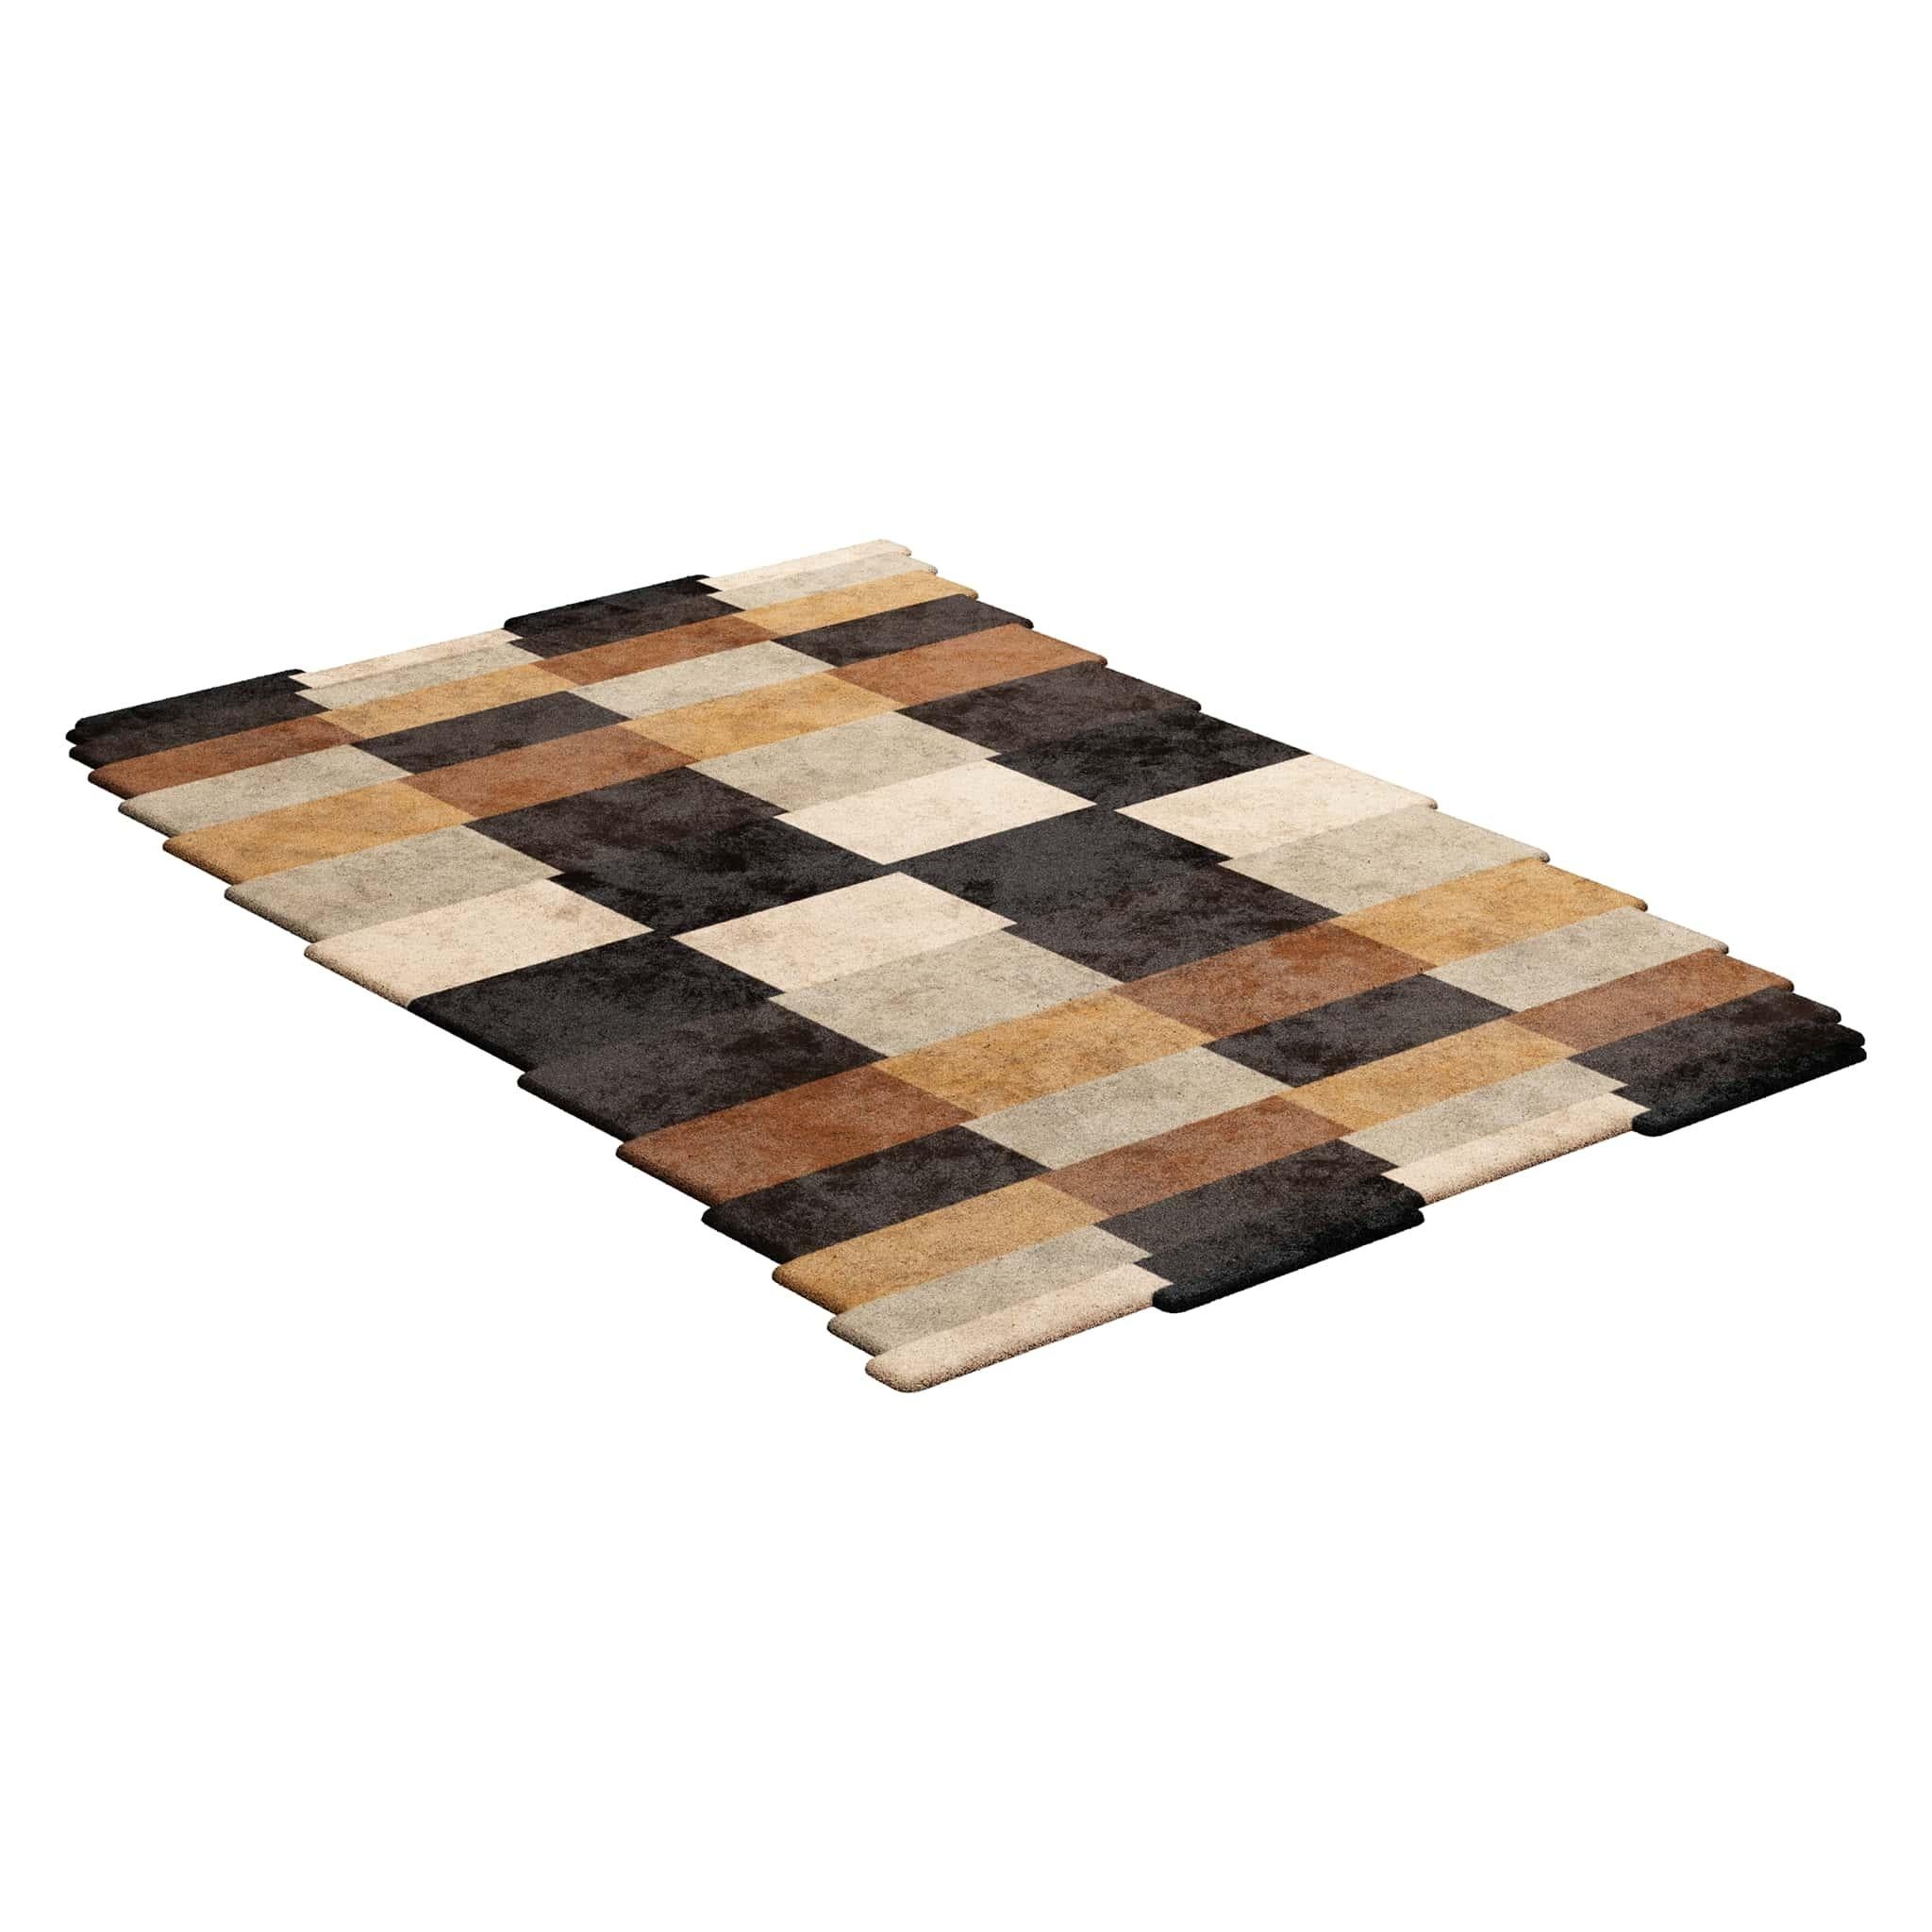 TAPIS Shaped #013 is an eclectic rug that brings back mid-century modern vibes mixed with Postmodern style. This rug is handmade using the hand-tufted technique from 100% botanical silk with a thickness of 16mm. Available in sizes Small and Large.